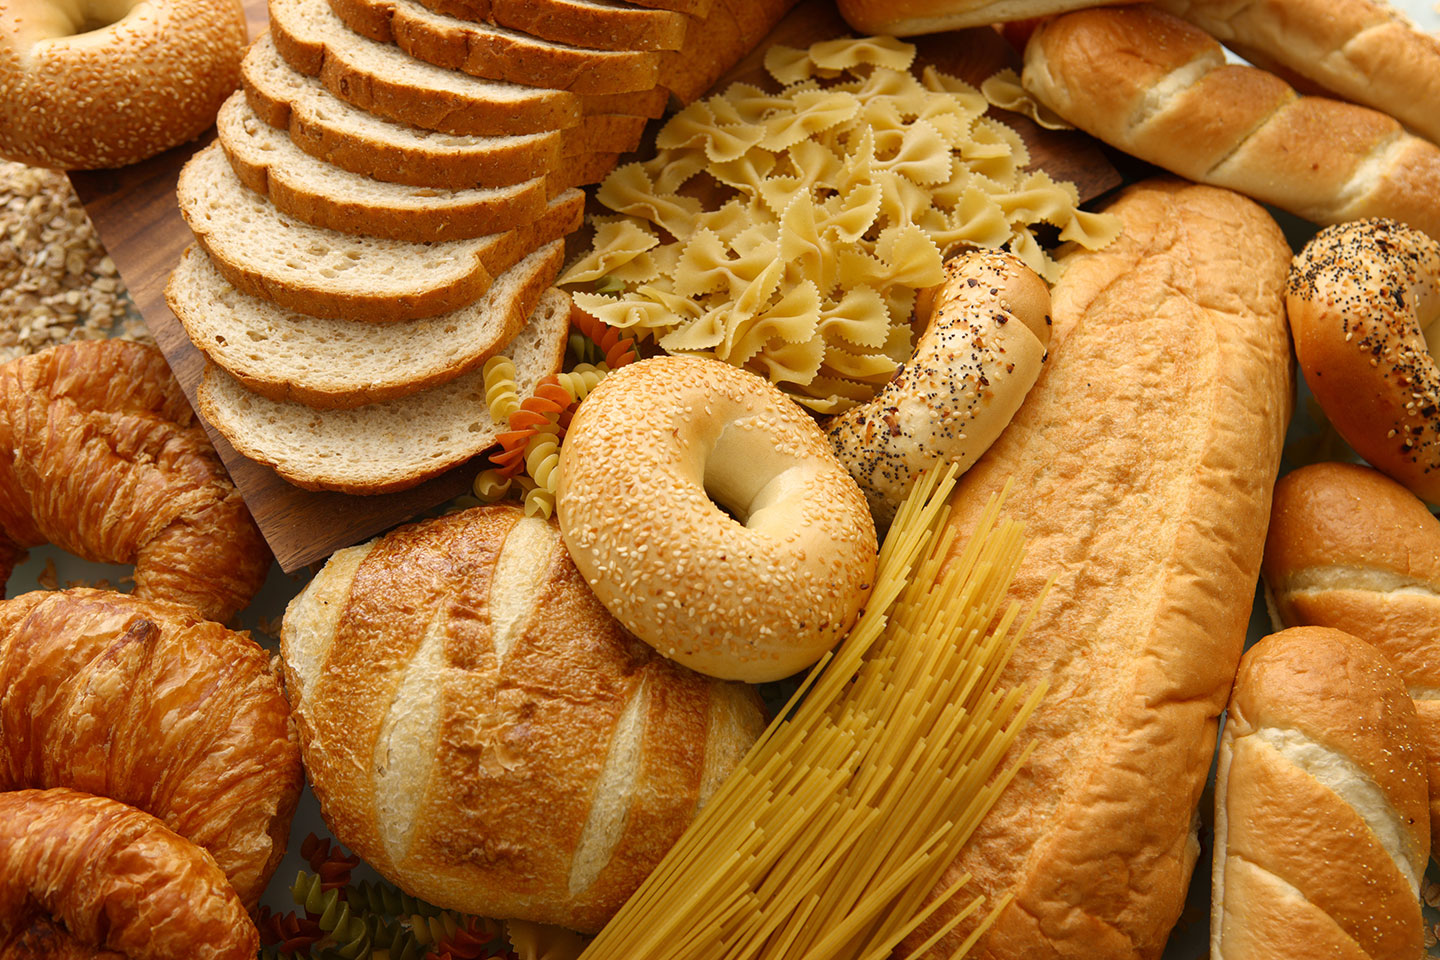 Carbohydrate foods like bread, bagels, pasta